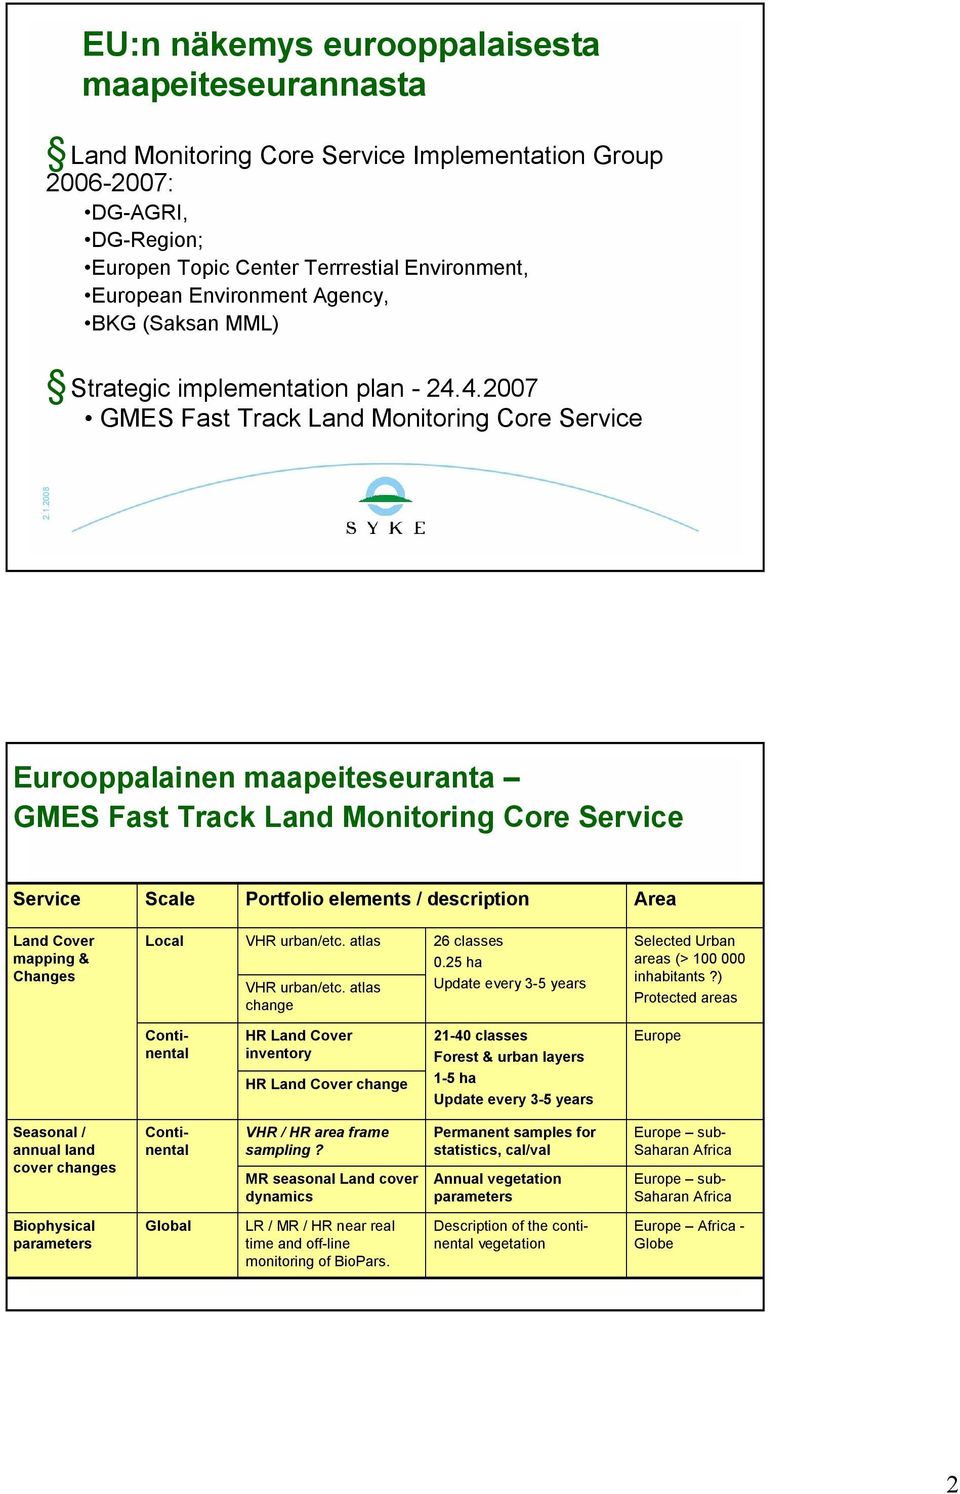 4.2007 GMES Fast Track Land Monitoring Core Service Eurooppalainen maapeiteseuranta GMES Fast Track Land Monitoring Core Service Service Scale Portfolio elements / description Area Land Cover mapping